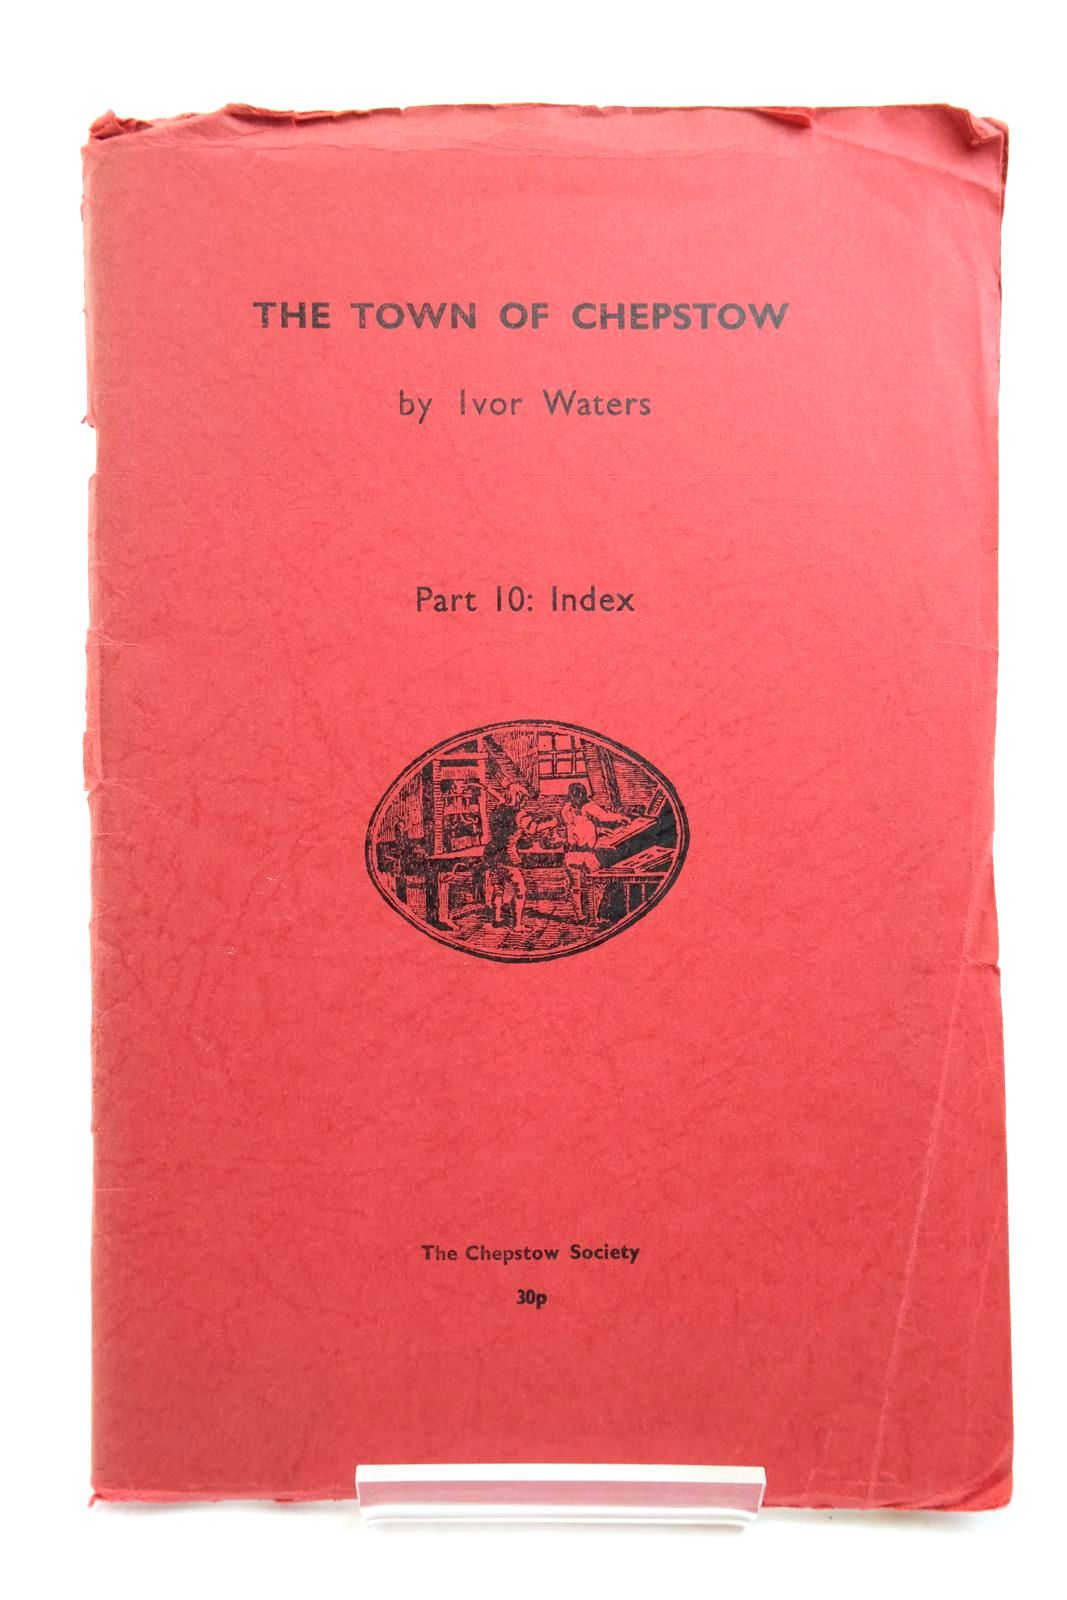 Photo of THE TOWN OF CHEPSTOW PART 10 INDEX written by Waters, Ivor published by The Chepstow Society (STOCK CODE: 2140415)  for sale by Stella & Rose's Books